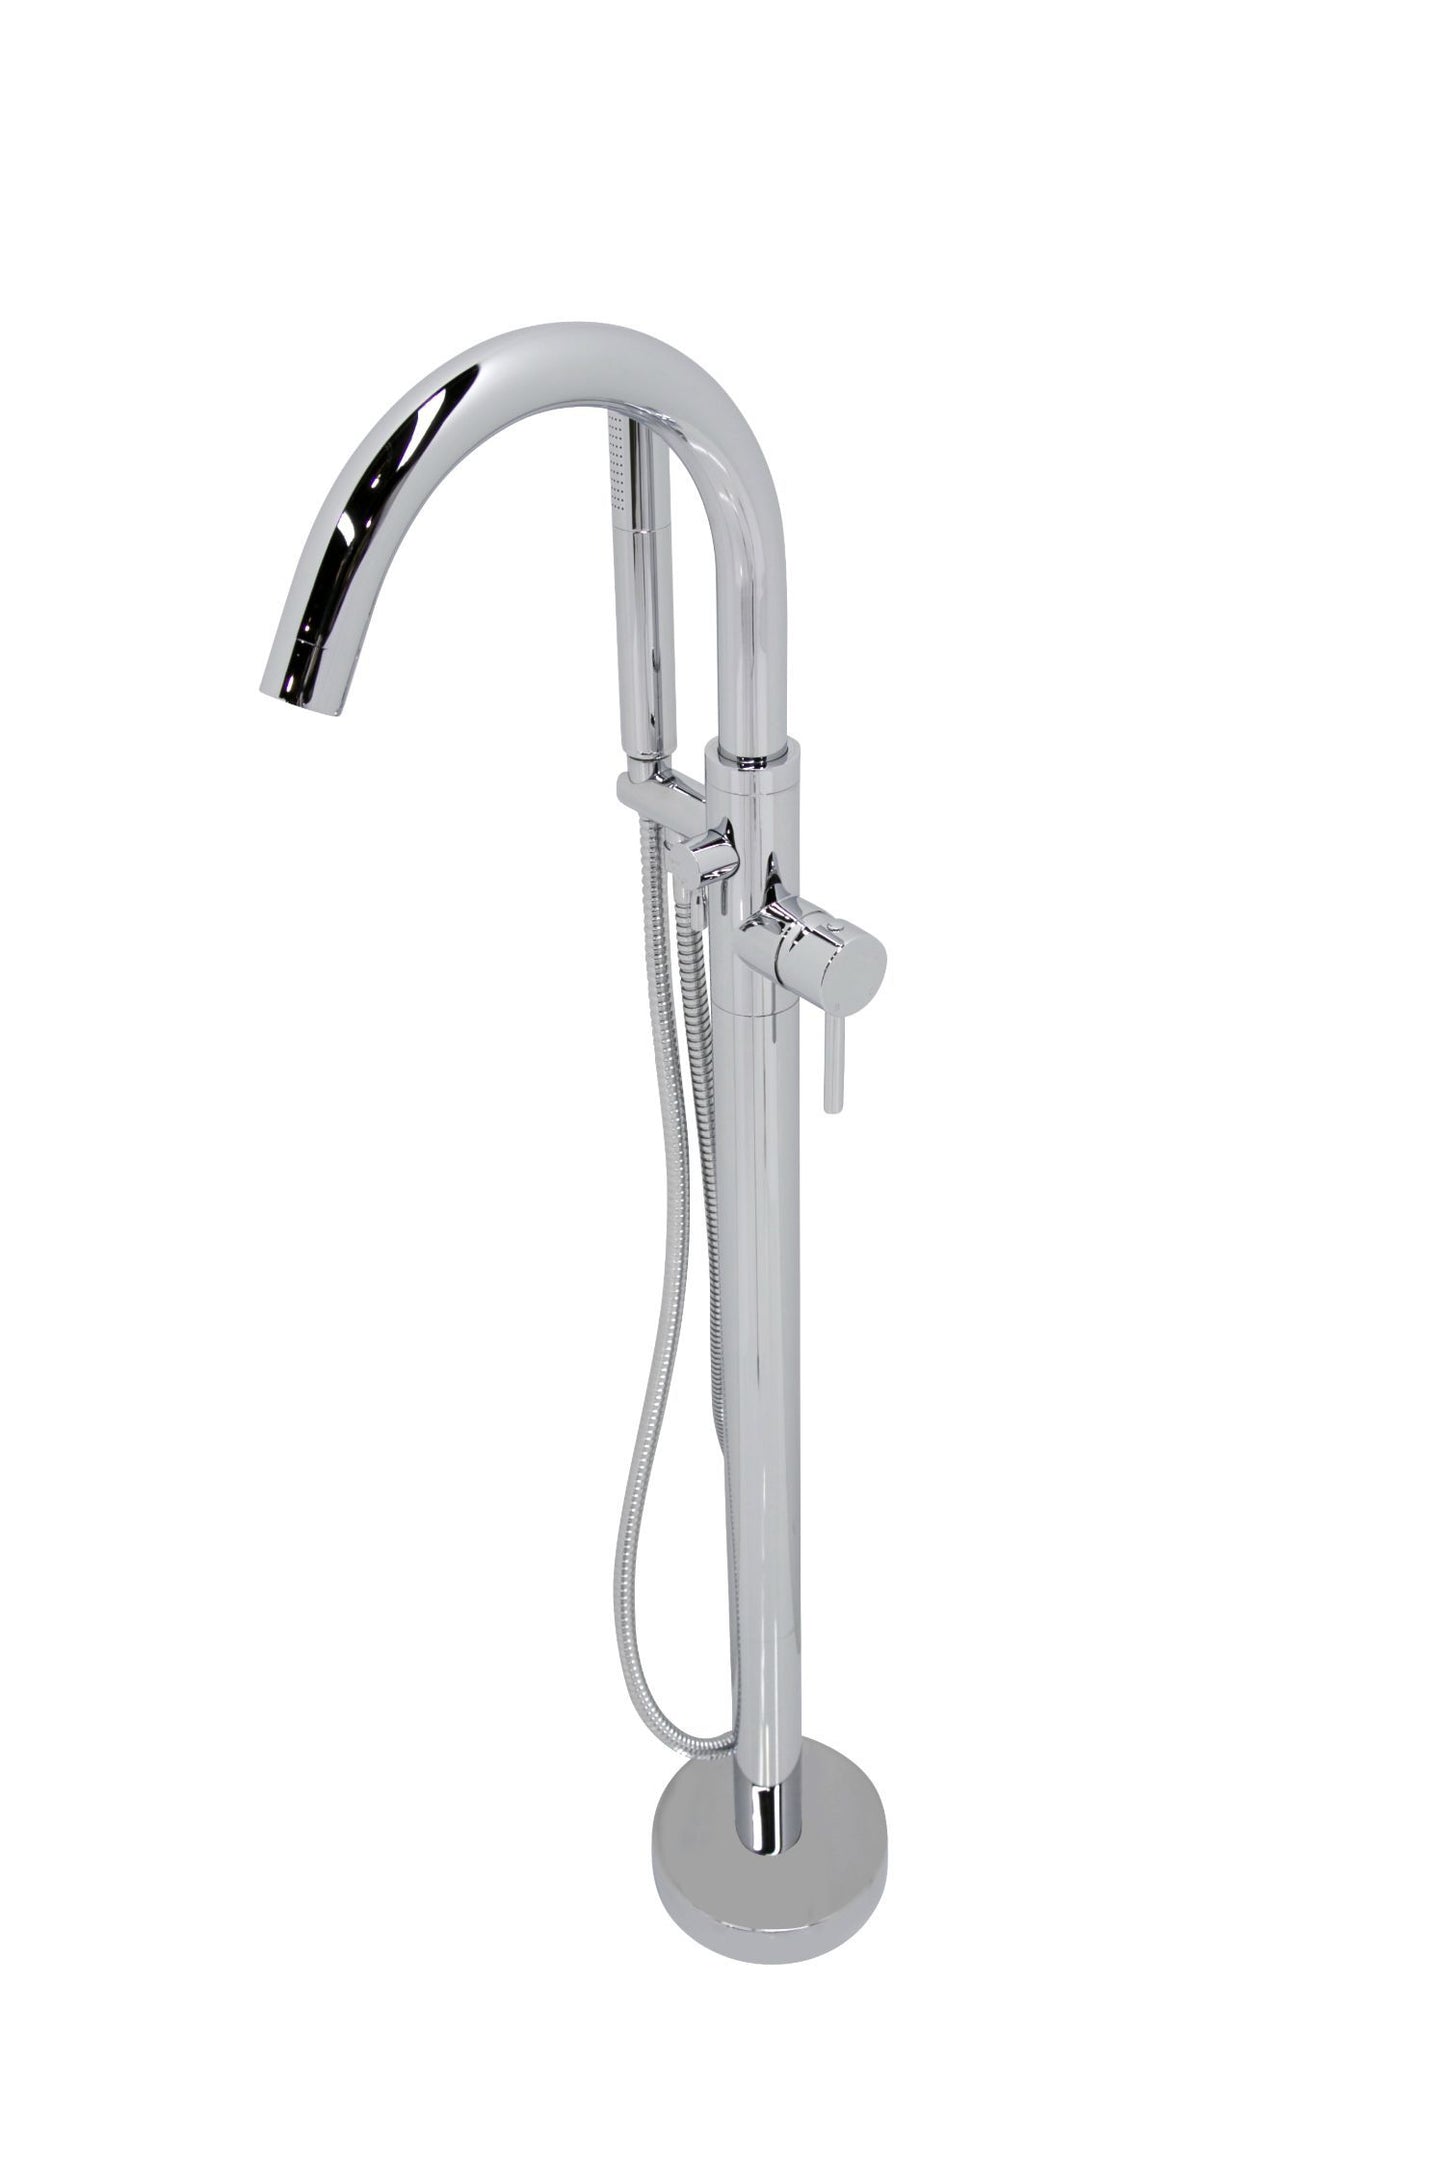 Cestino 5.5 ft. Man-Made Stone Classic Soaking Bathtub in Matte White and Kros Faucet in Chrome